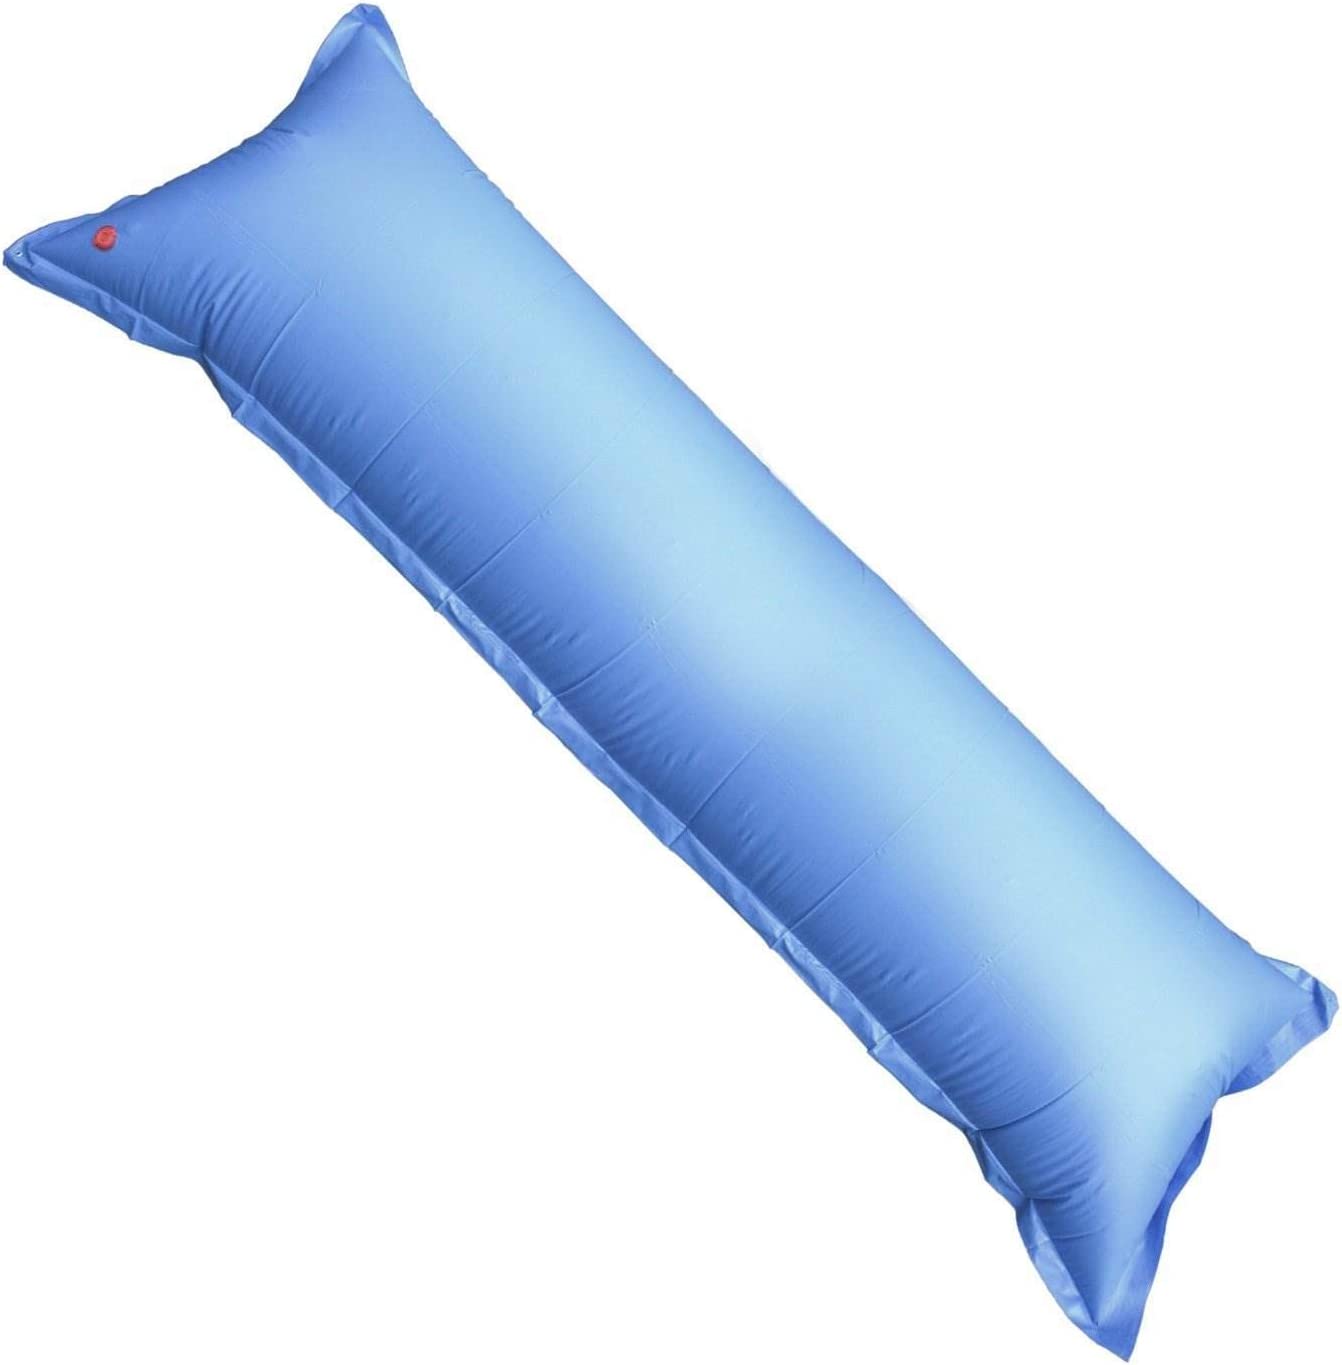 Swimline Winter Pool Cover Air Pillows – 4.5 ft. x 15 ft.